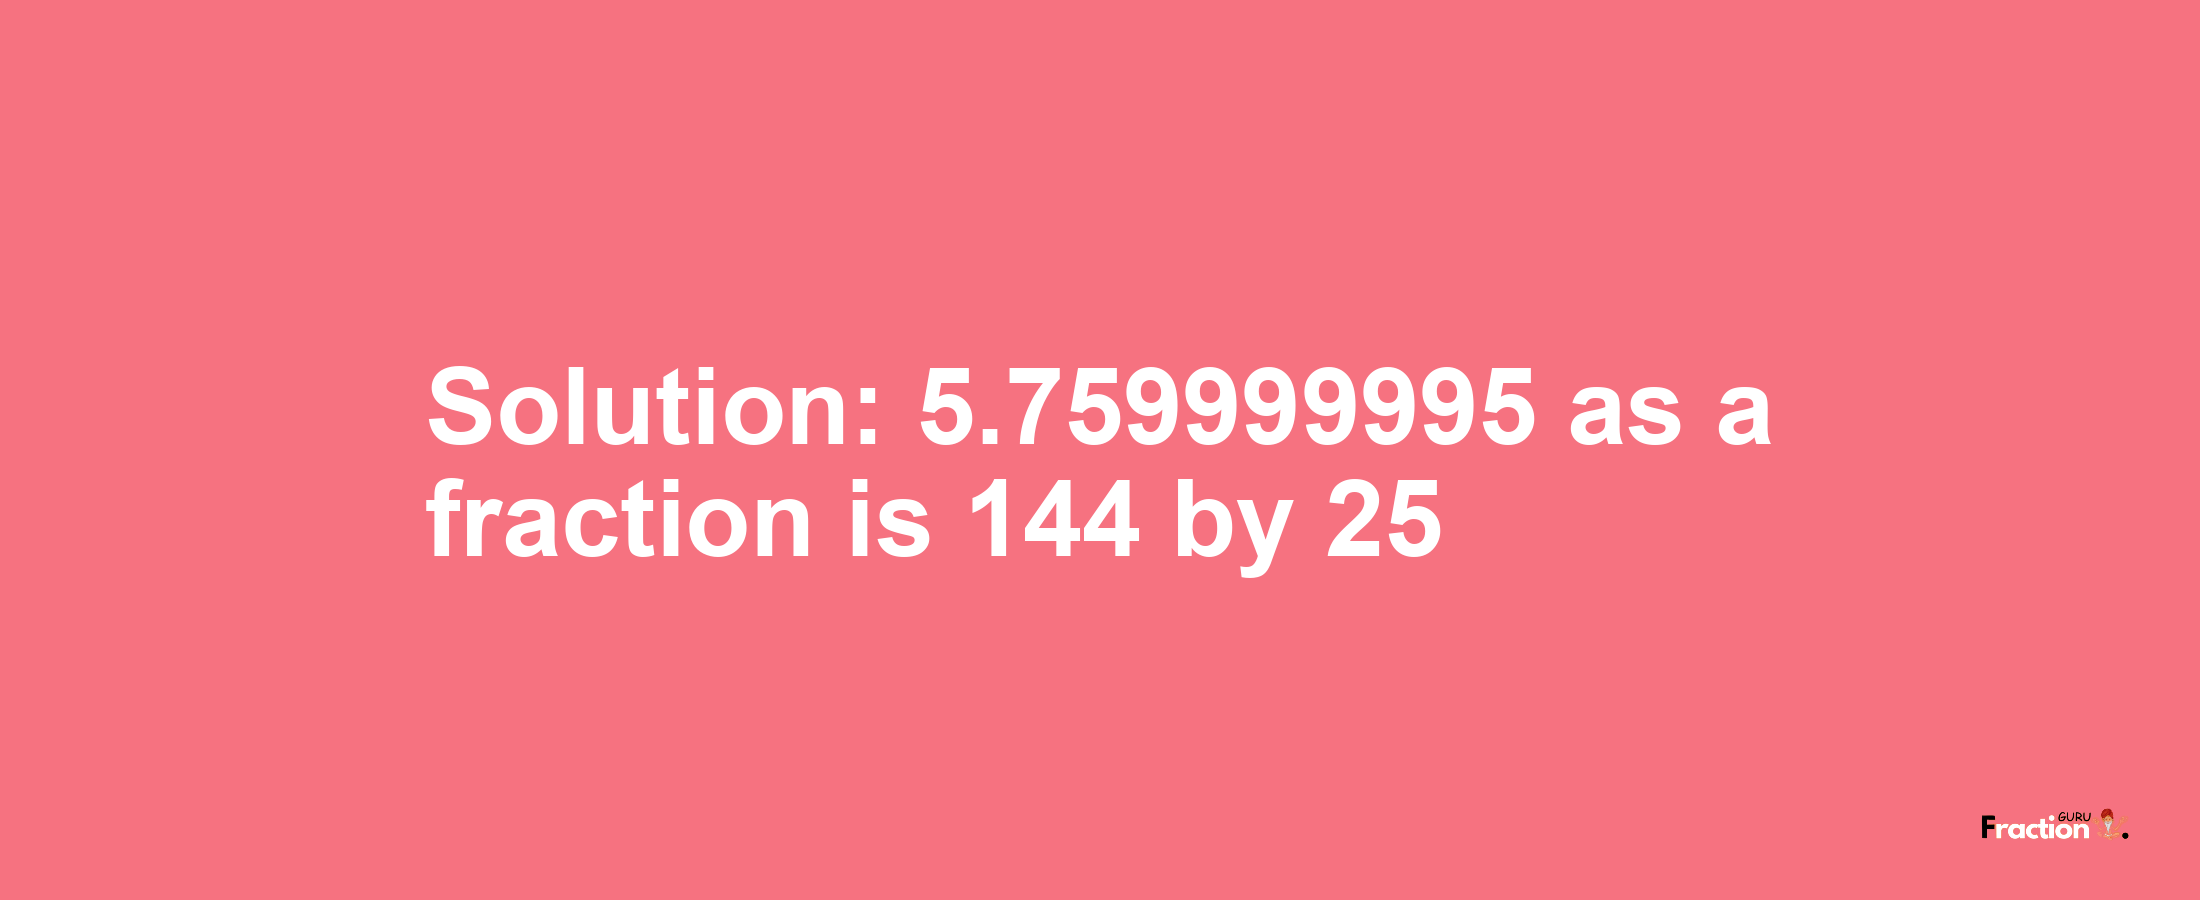 Solution:5.759999995 as a fraction is 144/25